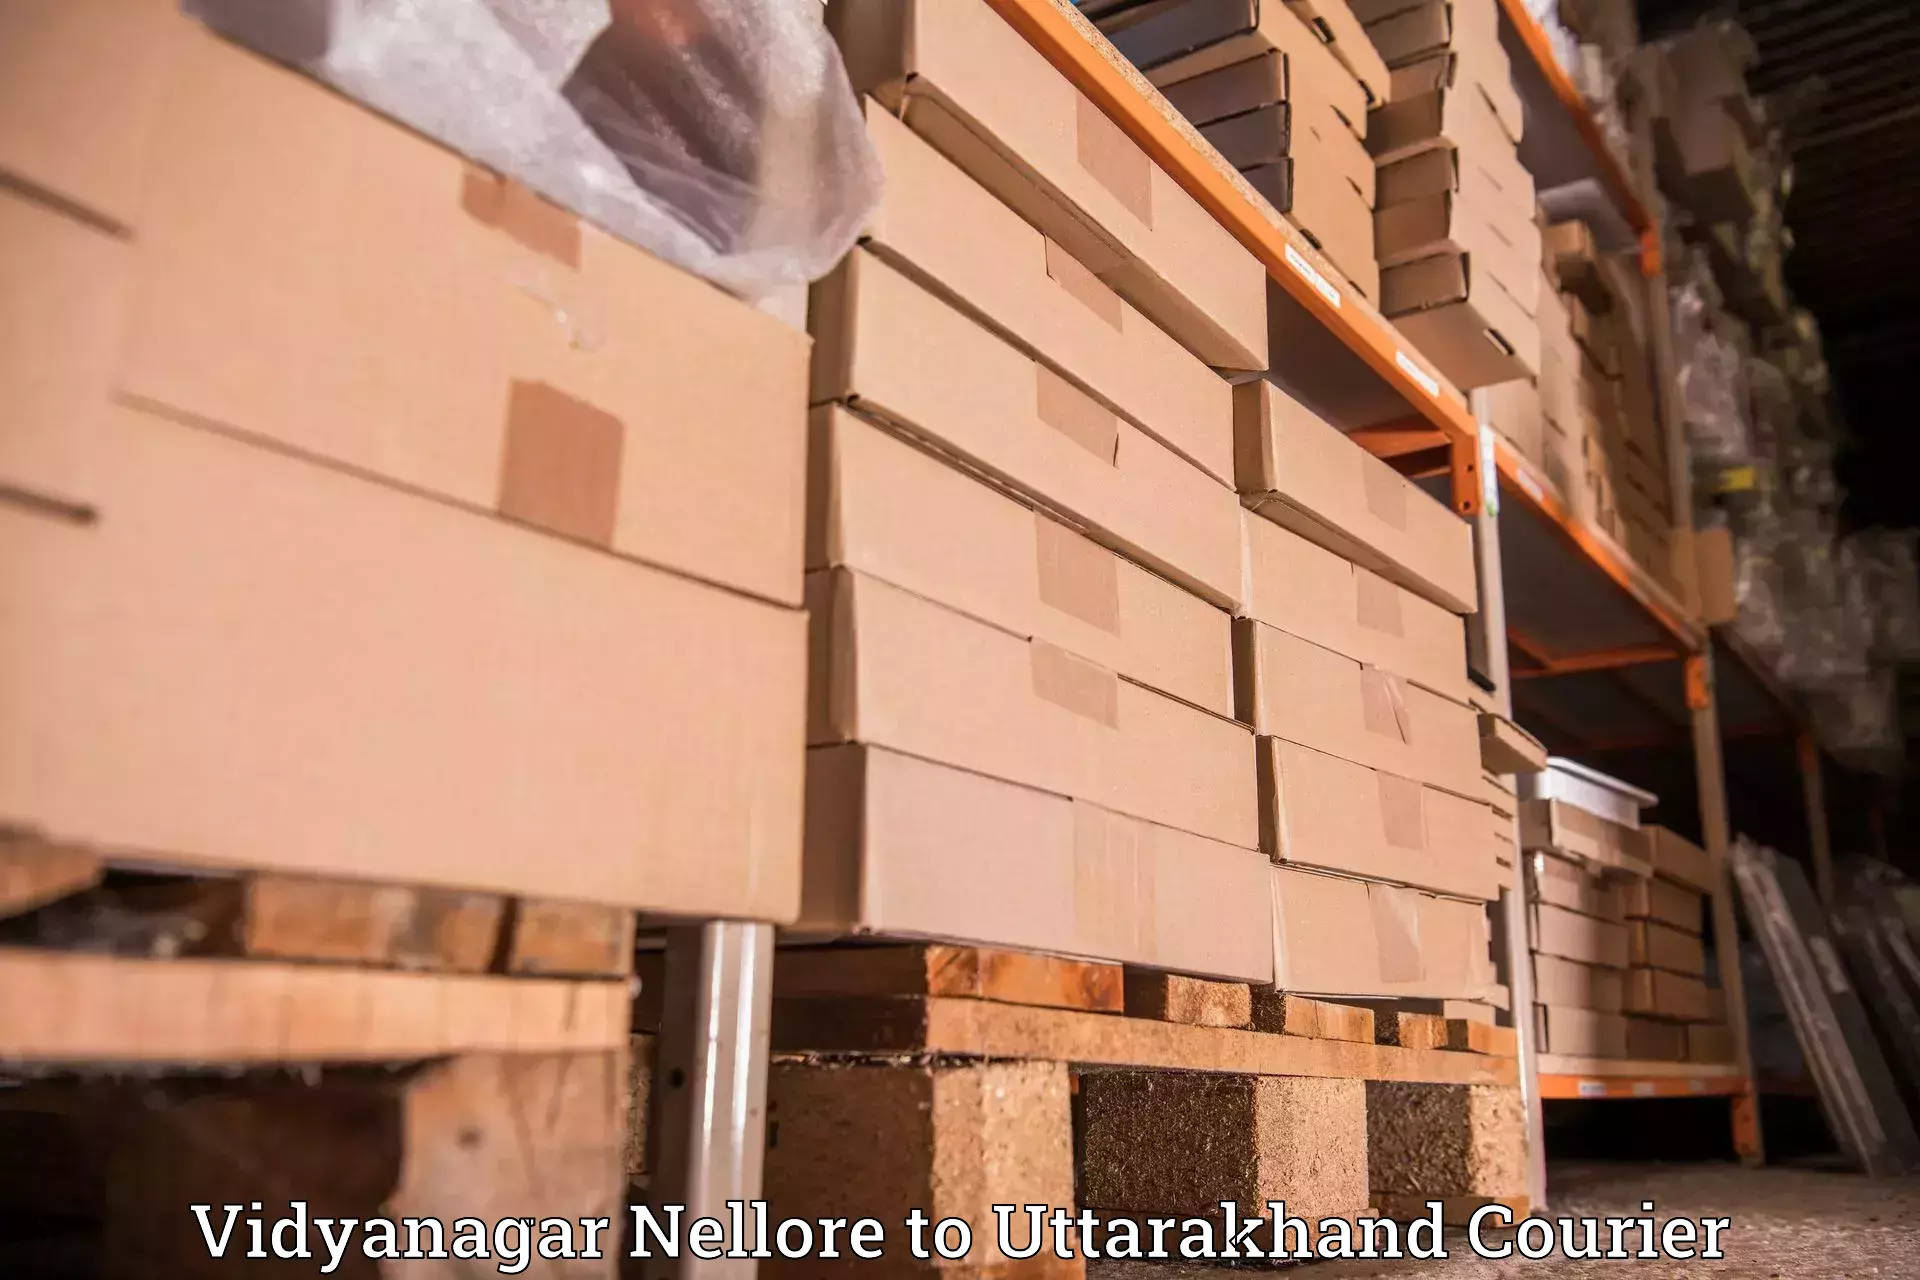 State-of-the-art courier technology Vidyanagar Nellore to Chamoli